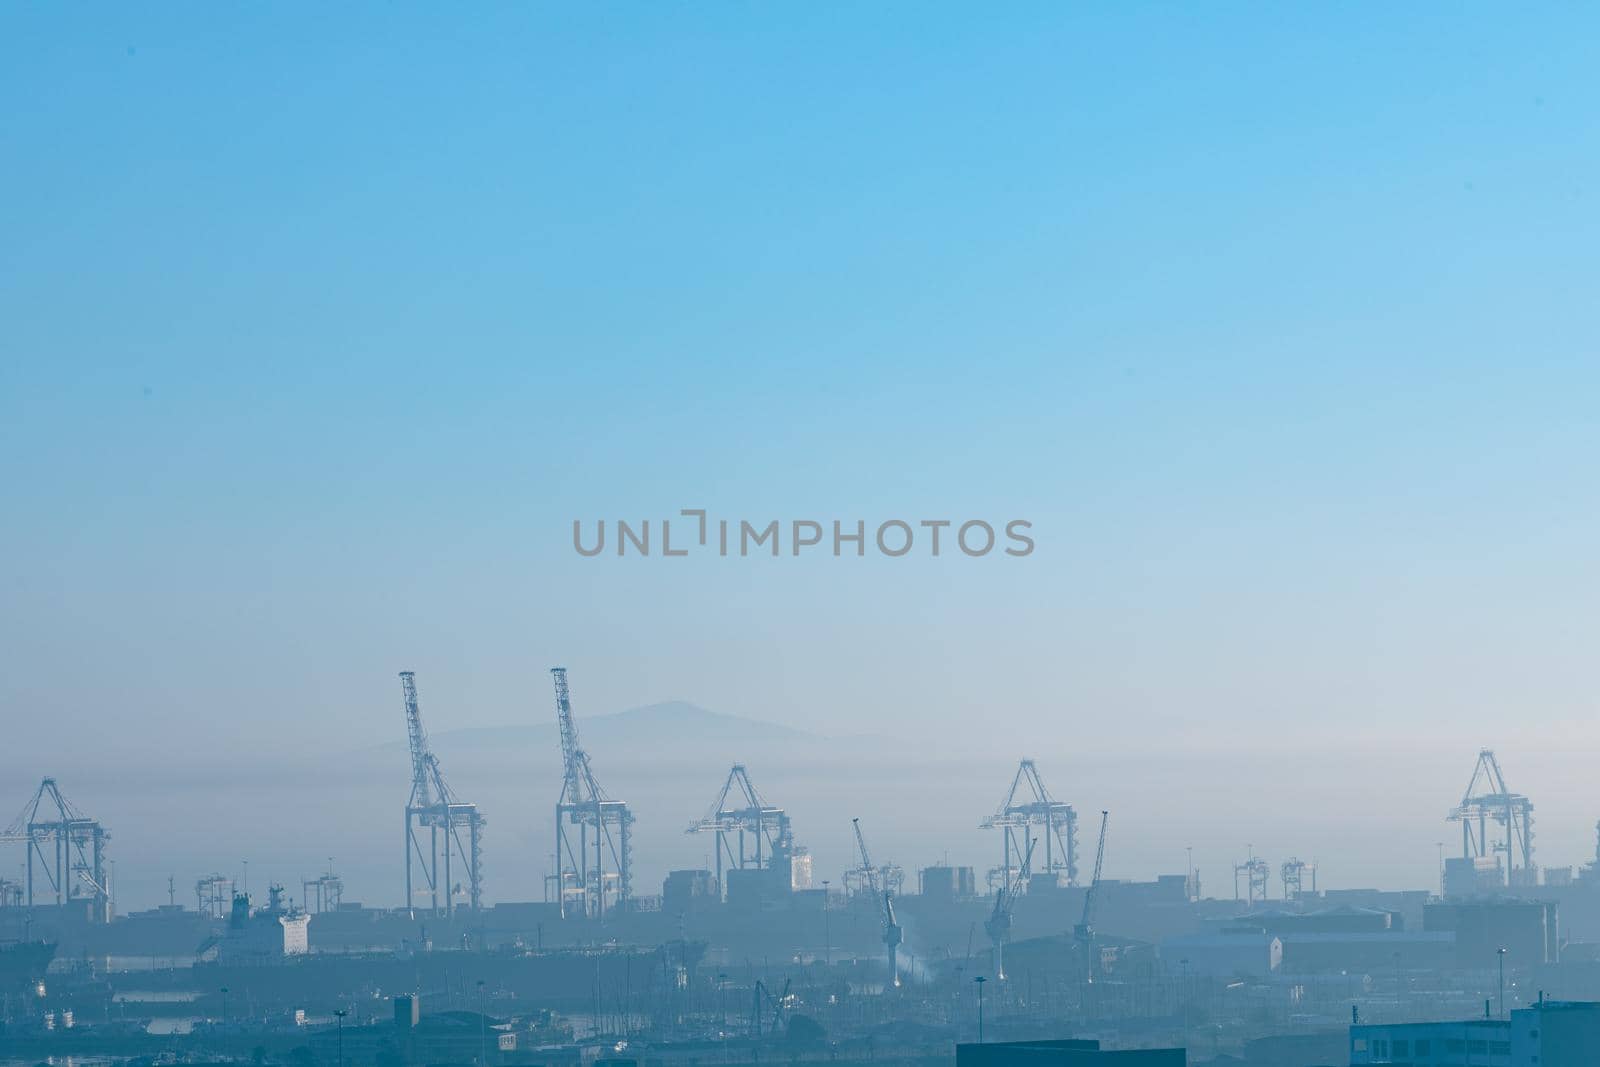 General view of cityscape with multiple modern buildings and cranes in the morning by Wavebreakmedia